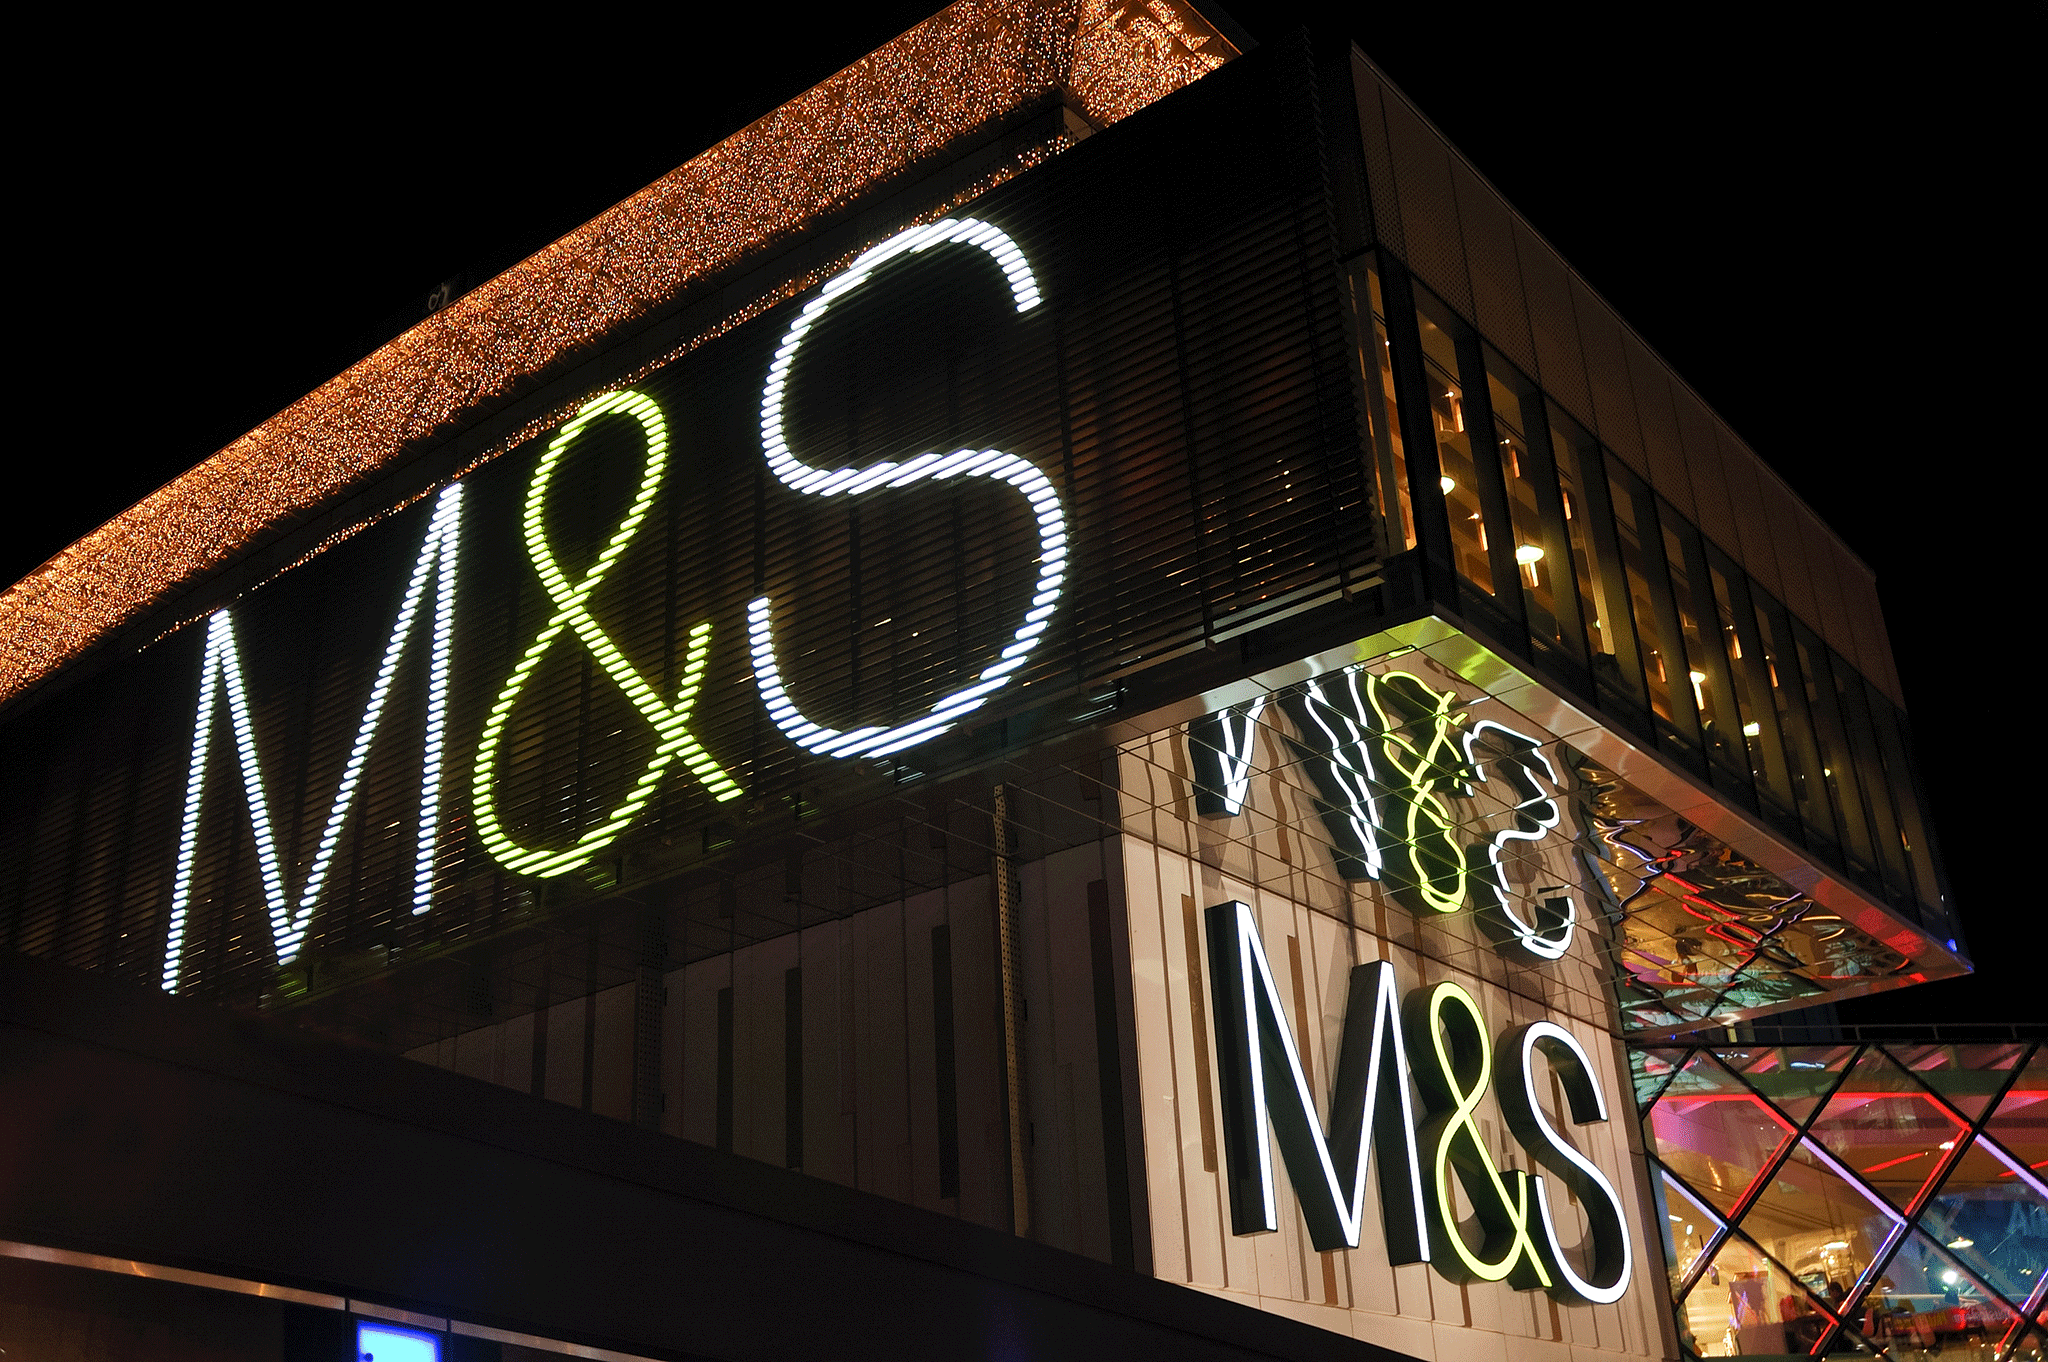 M&S announces closure of up to 14 stores, putting 468 jobs at risk